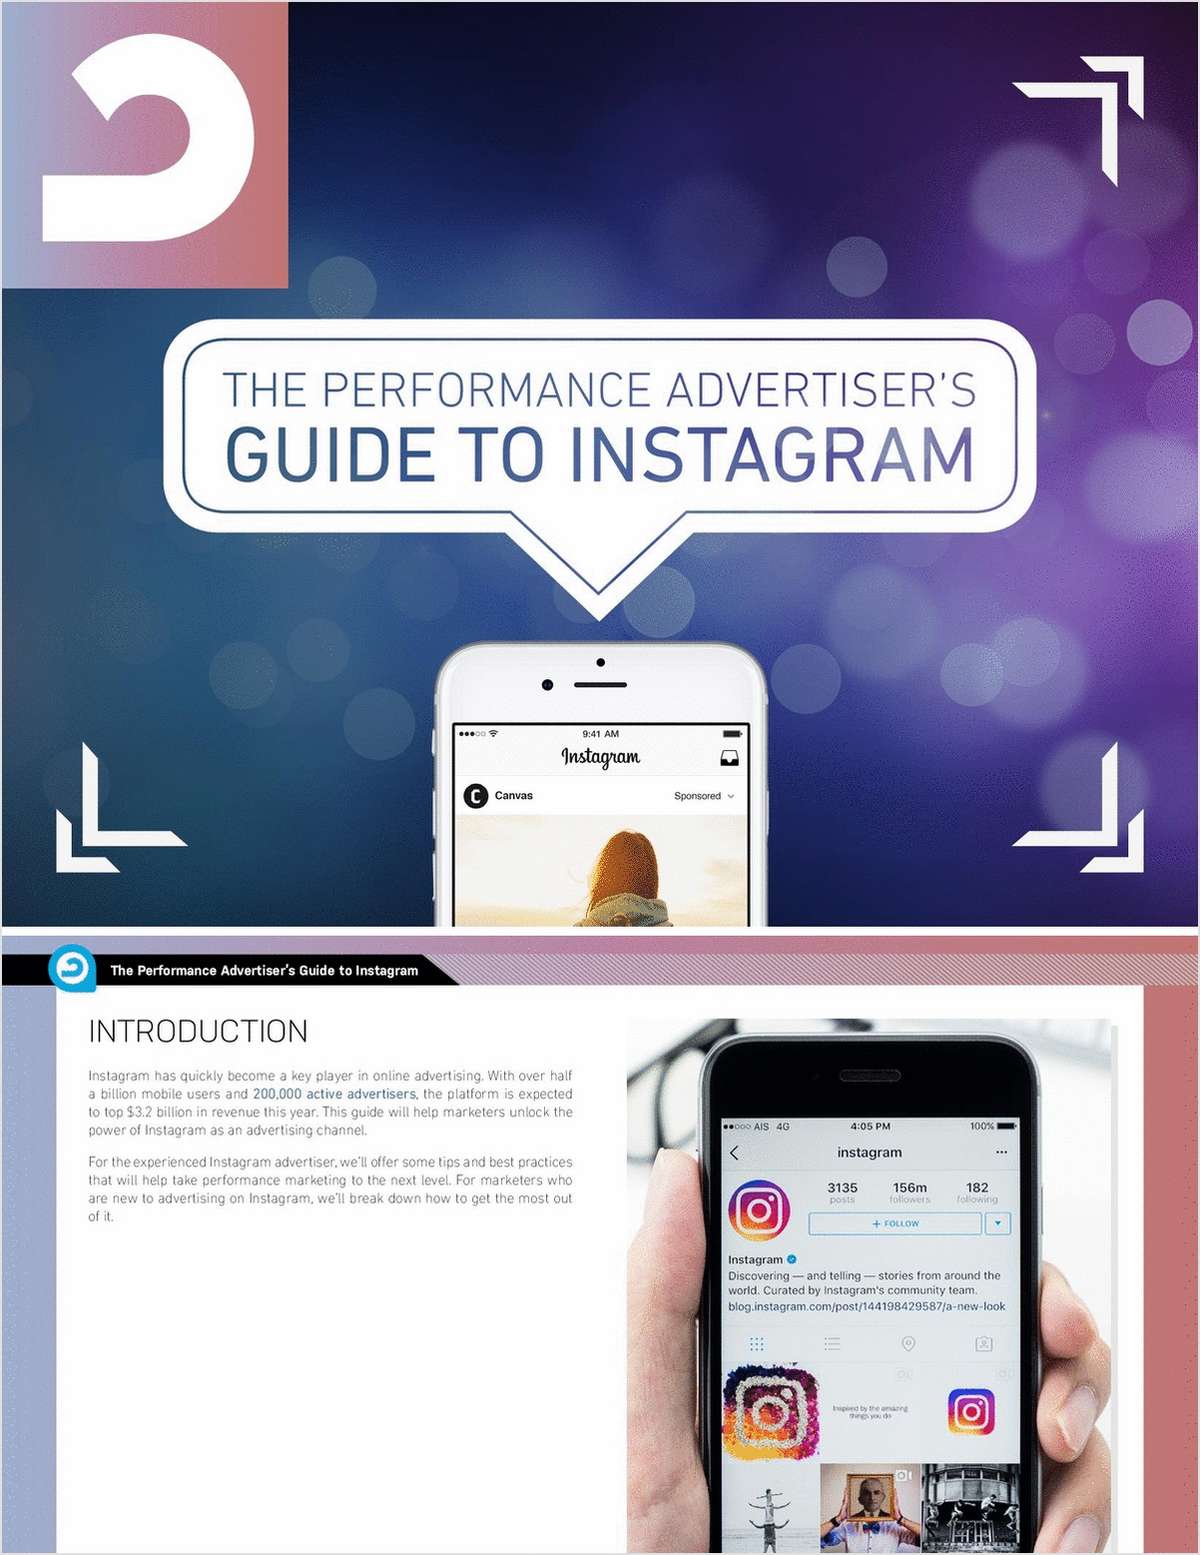 The Performance Advertiser's Guide to Instagram